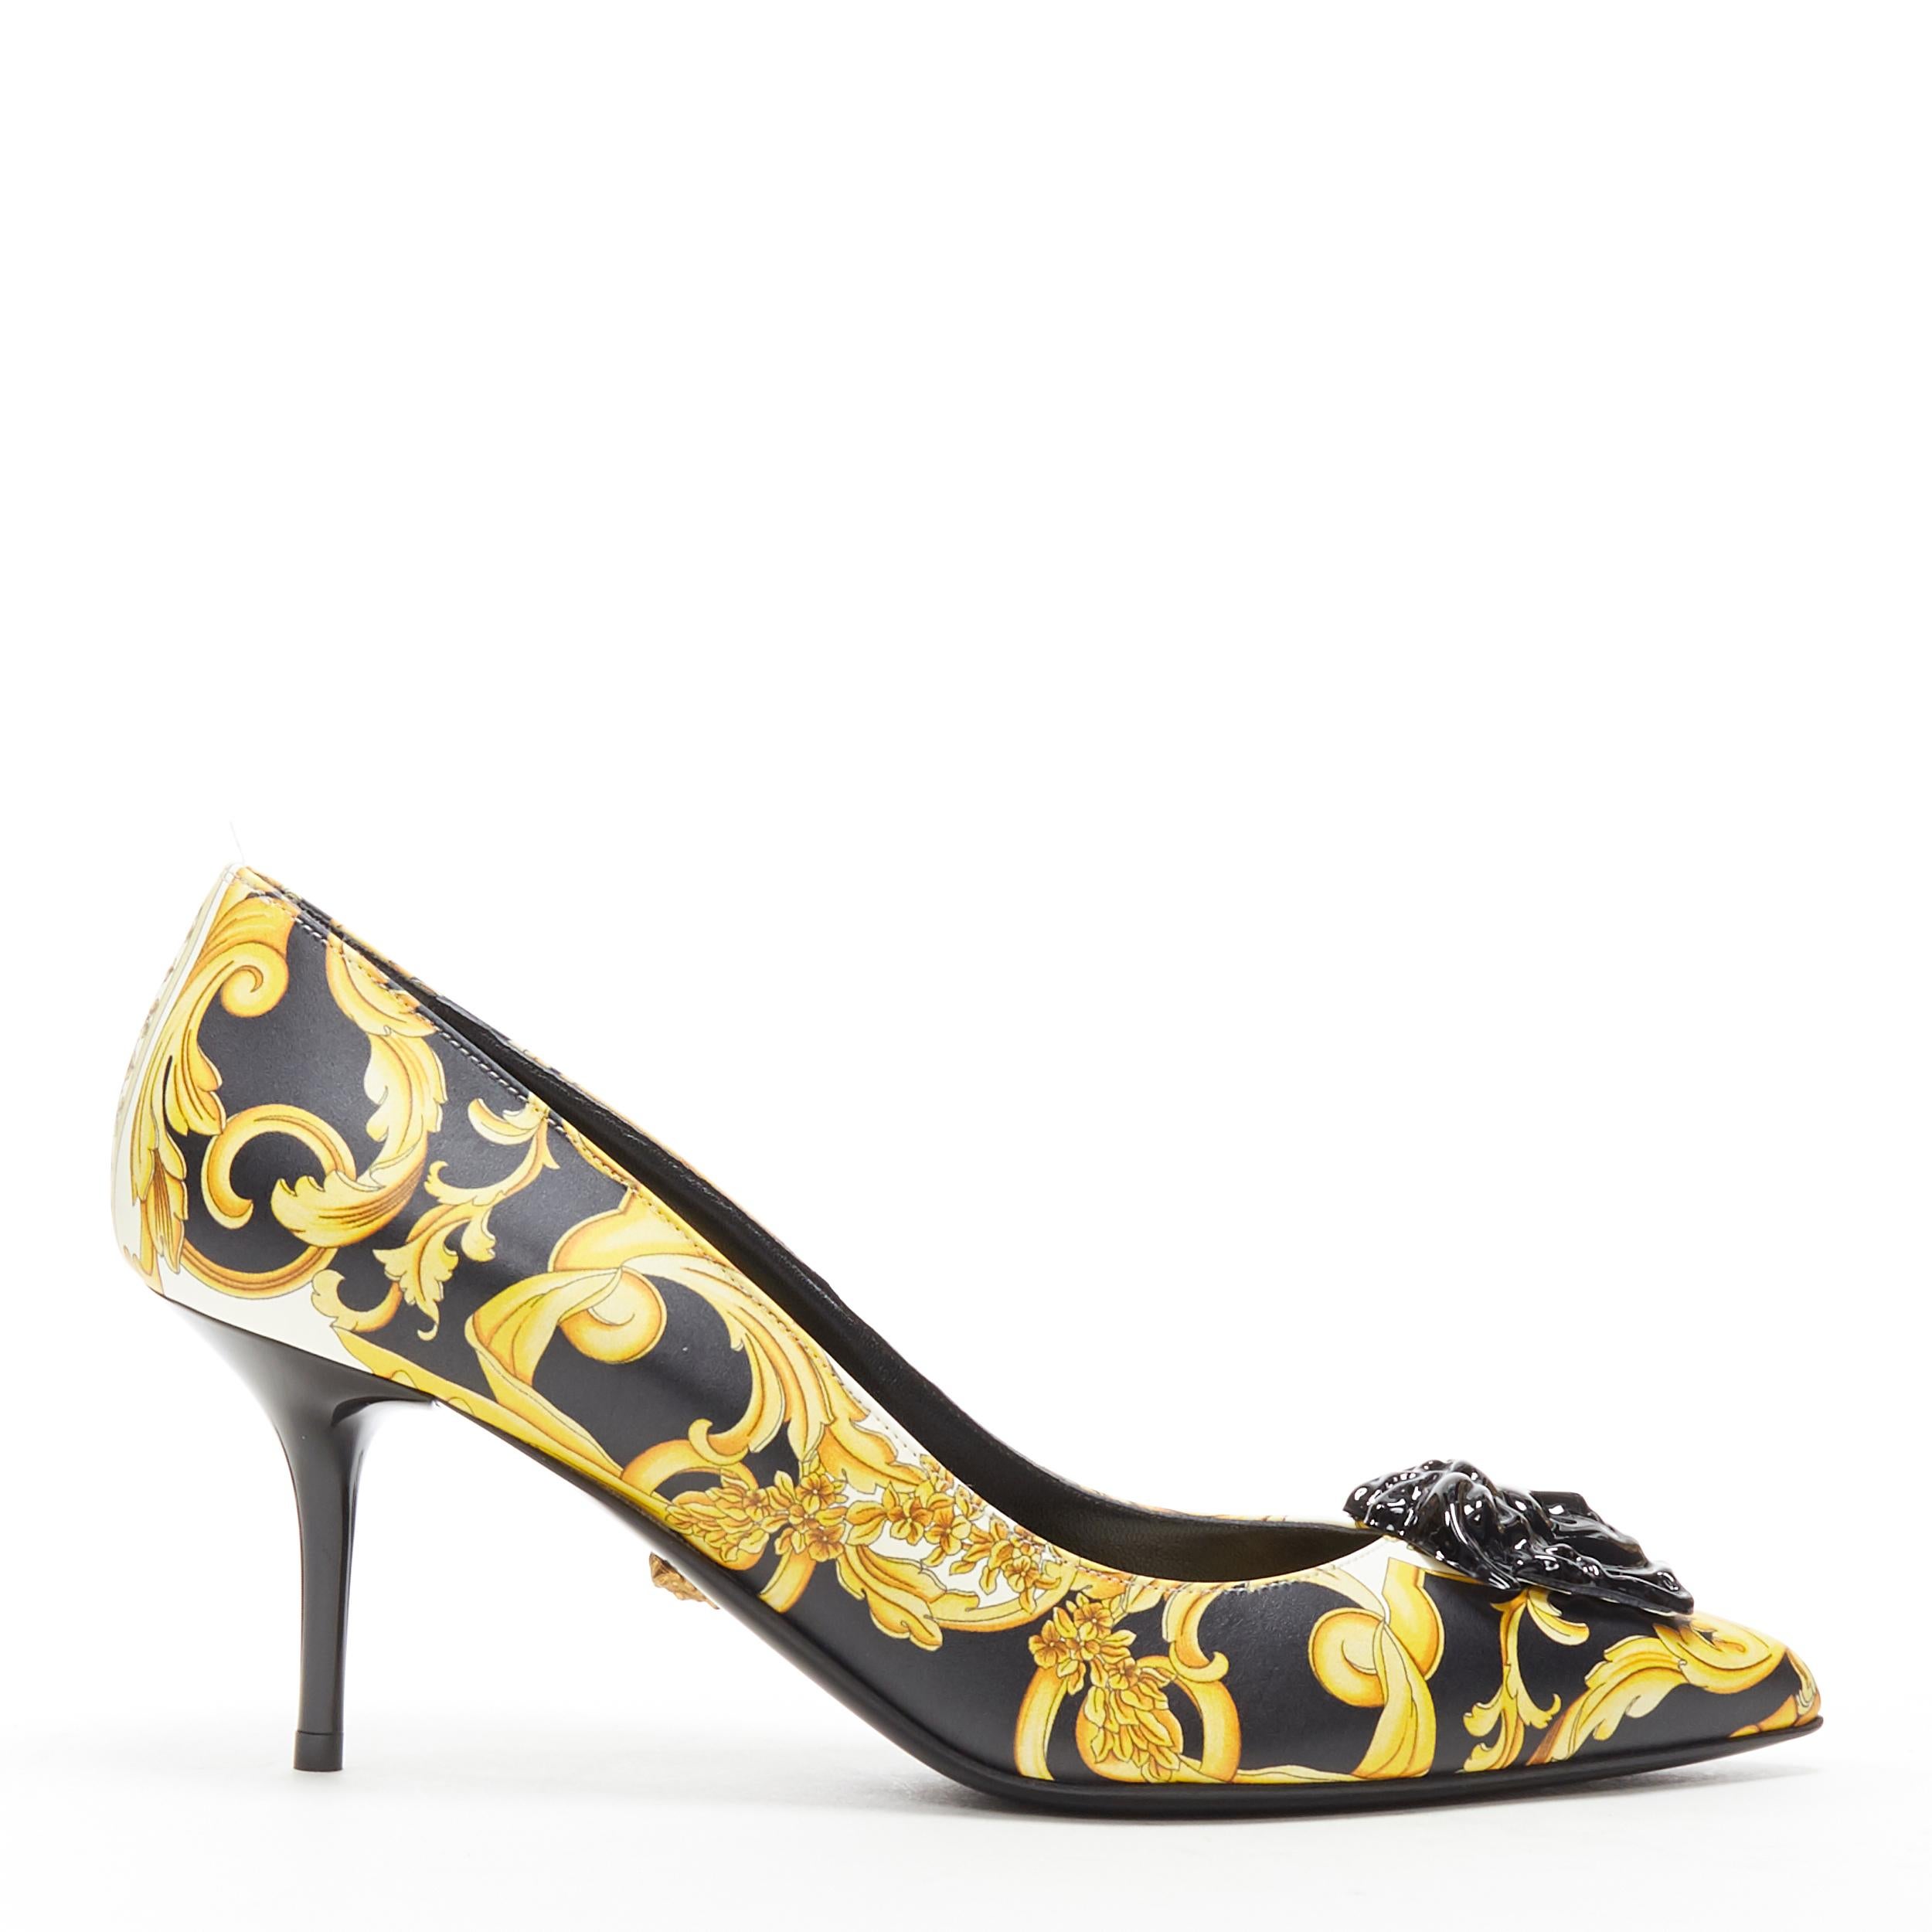 new VERSACE black gold baroque floral Medusa face pointy pigalle pump EU39 
Brand: Versace
Designer: Donatella Versace
Model Name / Style: Palazzo medusa
Material: Leather
Color: Gold
Pattern: Abstract
Extra Detail: High (3-3.9 in) heel height.